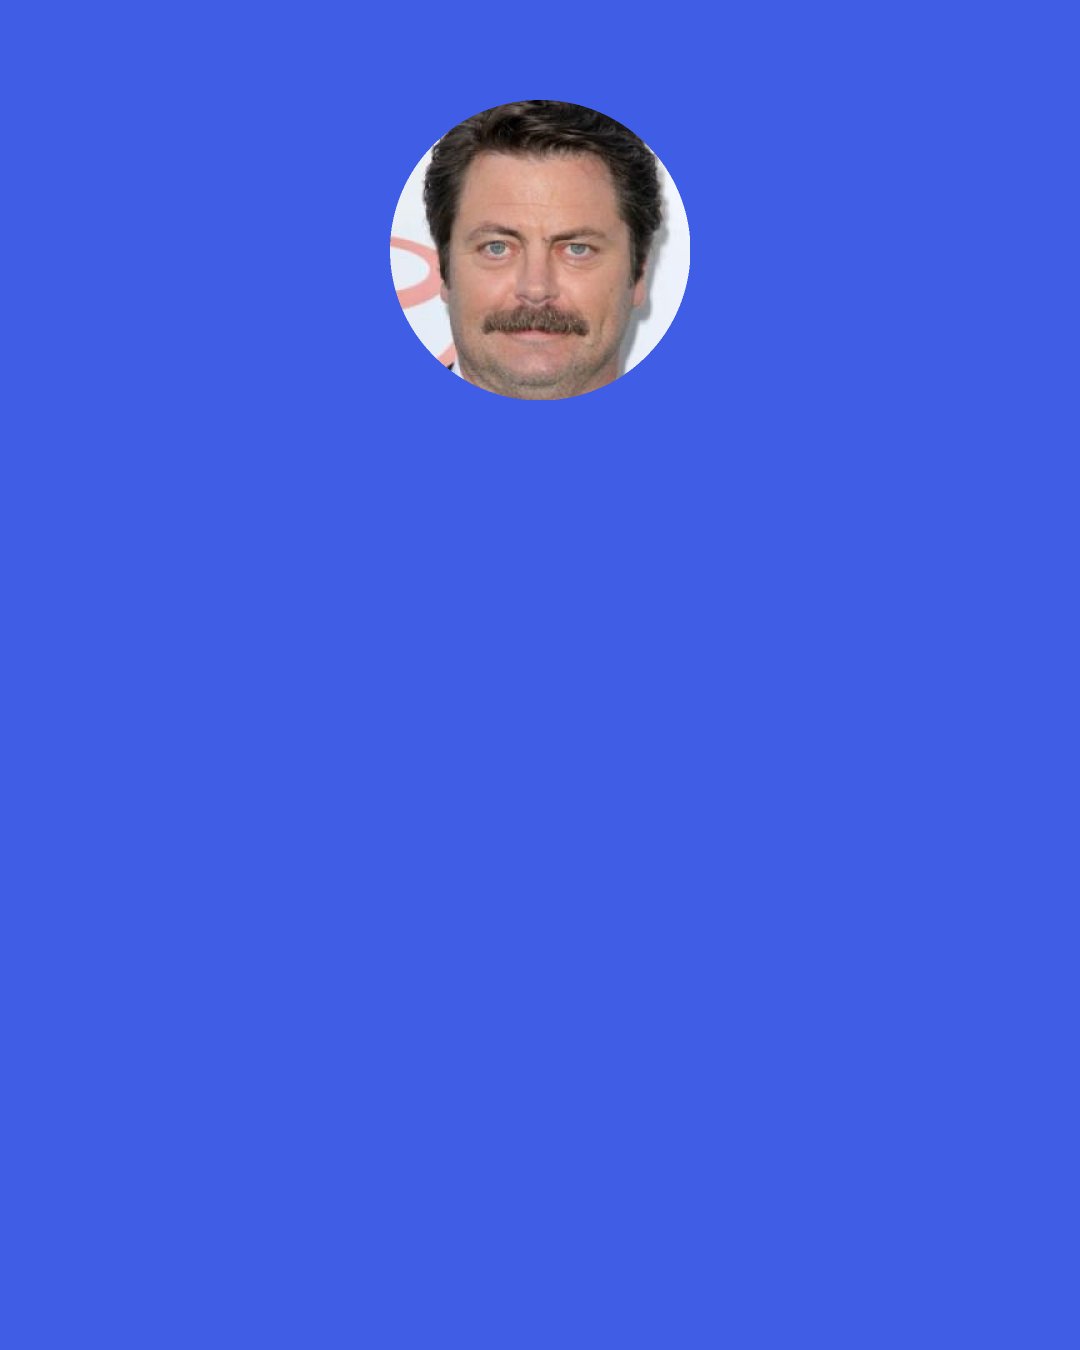 Nick Offerman: The key, I would say to any fledgling humorist starting out, is to make sure that sloppiness is part of your recipe. That way they come to expect fumbling and clumsiness and they say, "Oh, it must be a charming part of his personality."